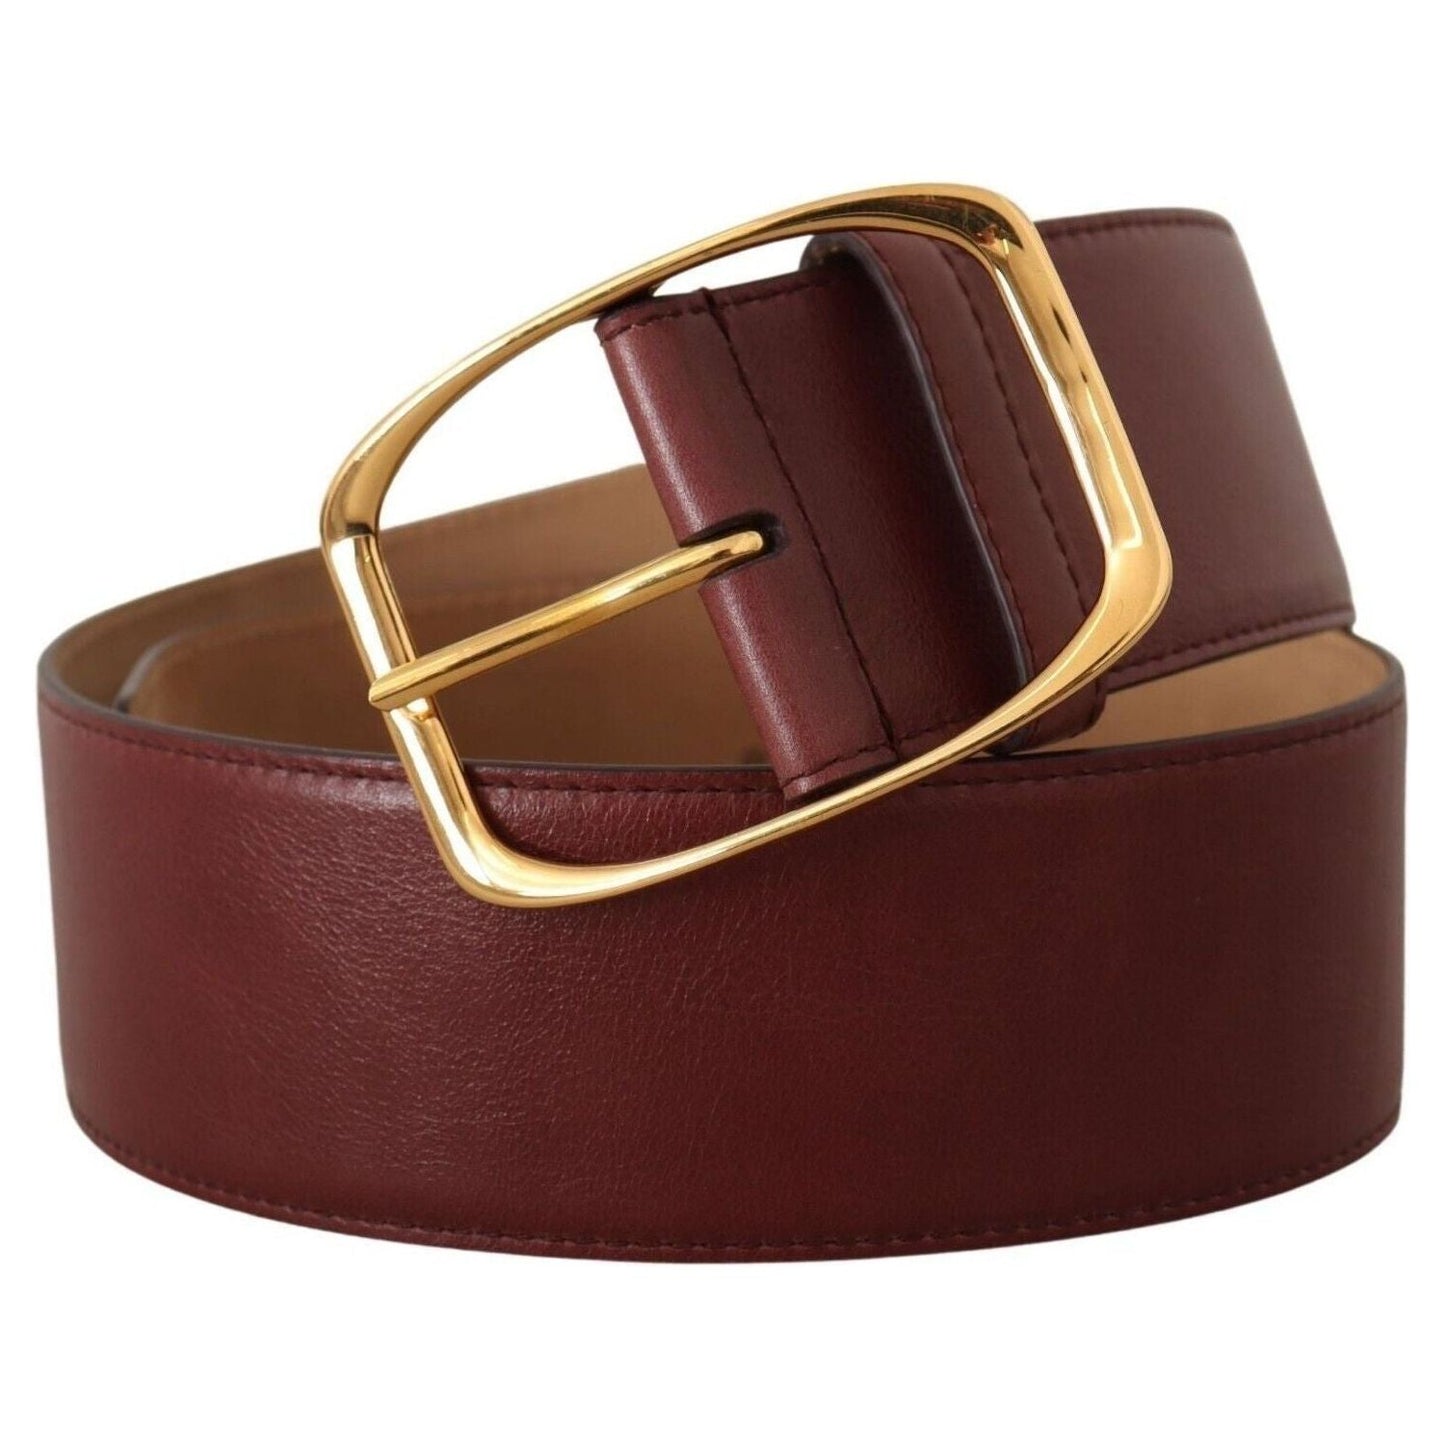 Dolce & Gabbana Elegant Maroon Leather Belt with Gold Buckle WOMAN BELTS maroon-leather-gold-metal-square-buckle-belt